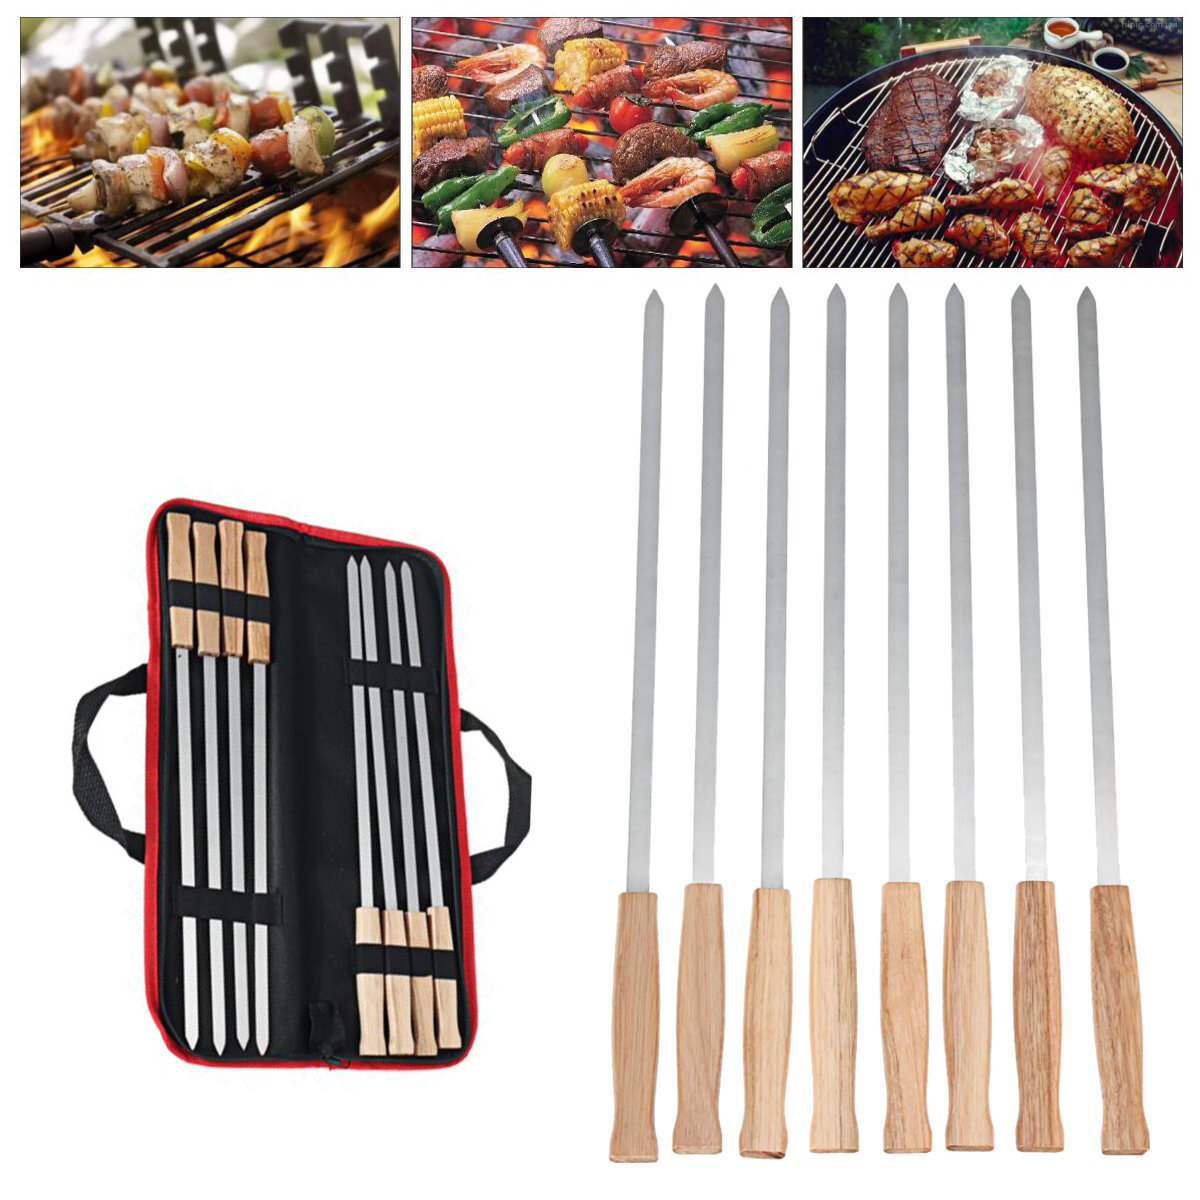 6 x Barbecue Brochettes Kebab Cook Grill Poêle Barbecue BBQ Bâtons